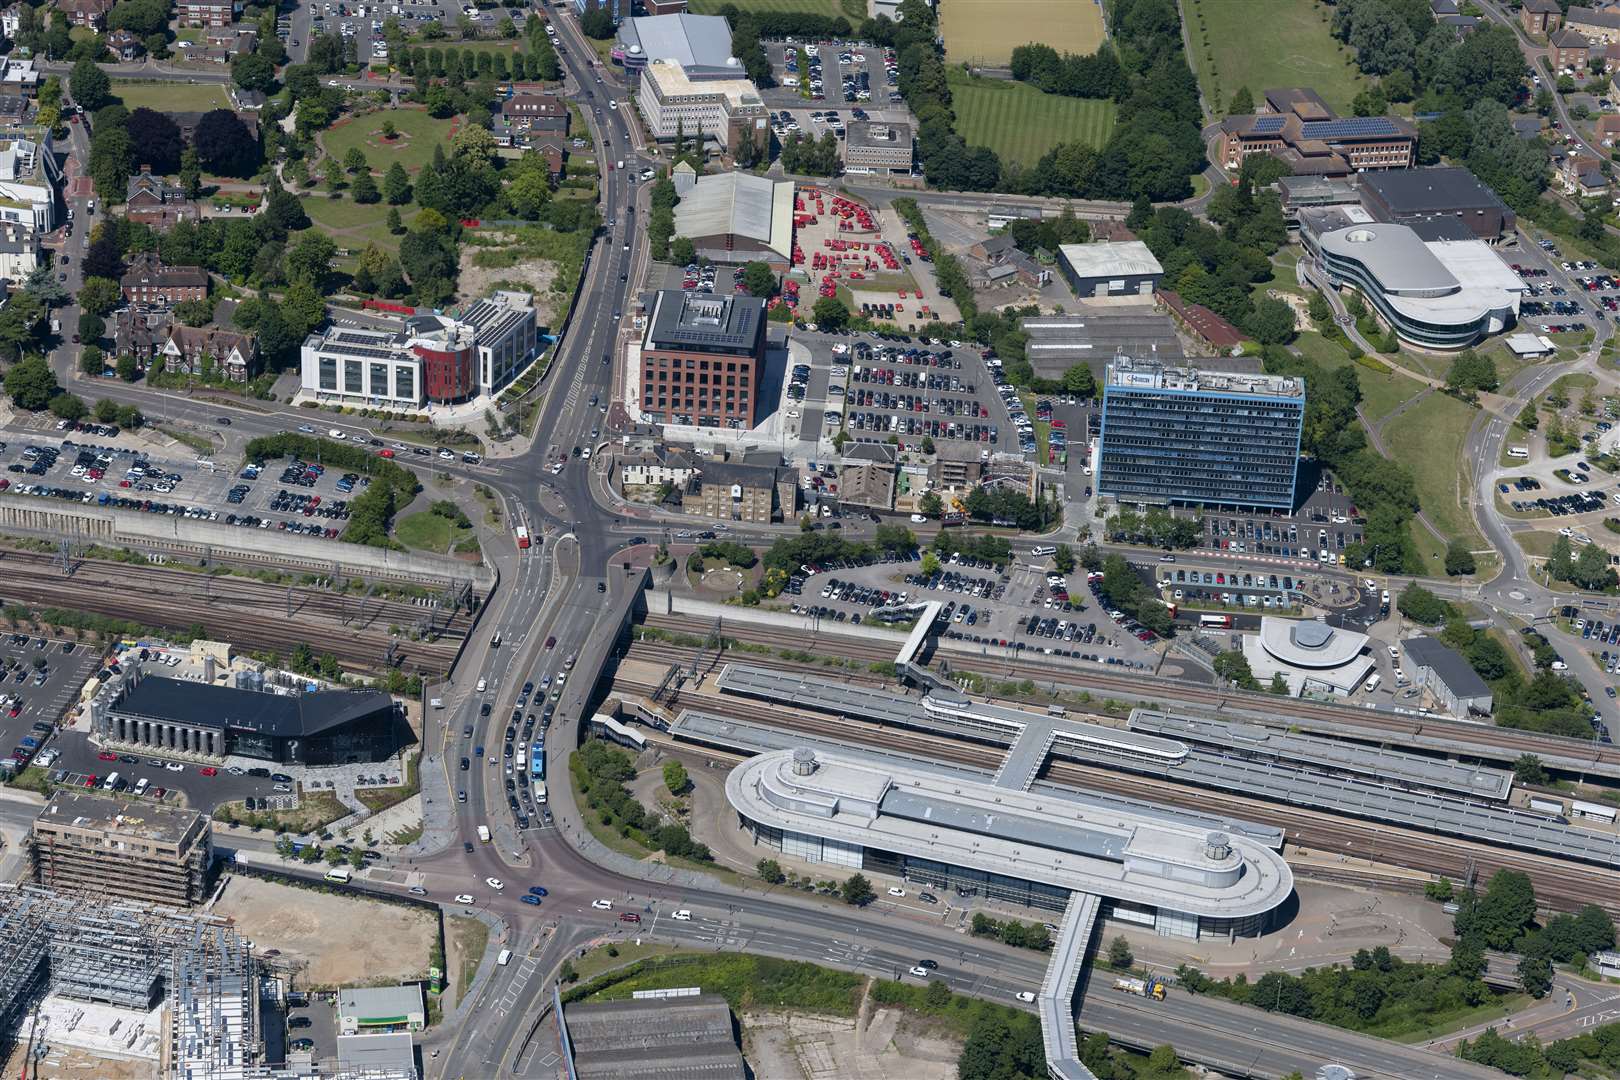 The area around the station has been the centre of a lot of development in recent years. This shot includes the Curious Brewery, Connect 38 office block, Ashford College and The Coachworks, which is a temporary leisure complex in Dover Place. Picture: Ady Kerry/Ashford Borough Council